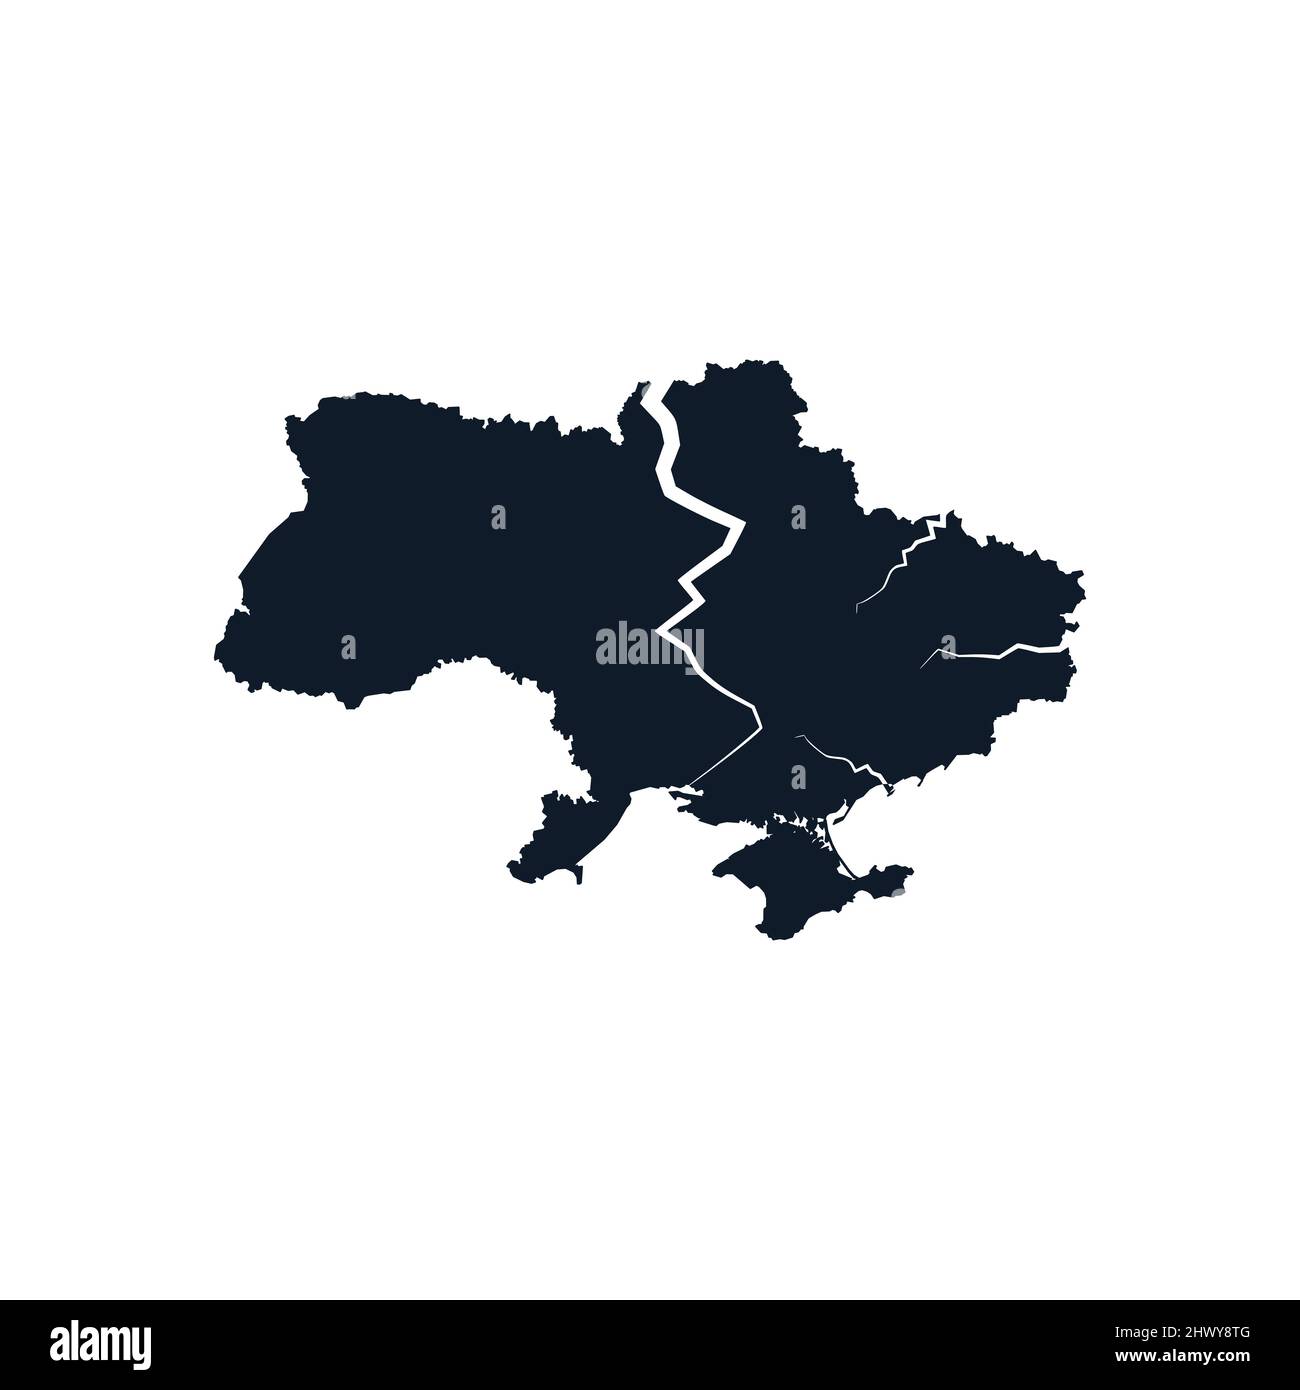 Crack on the map of Ukraine - decline, ruin, collapse, failure, disintegration and decimposition of Ukrainian country and state. Stock vector Stock Vector